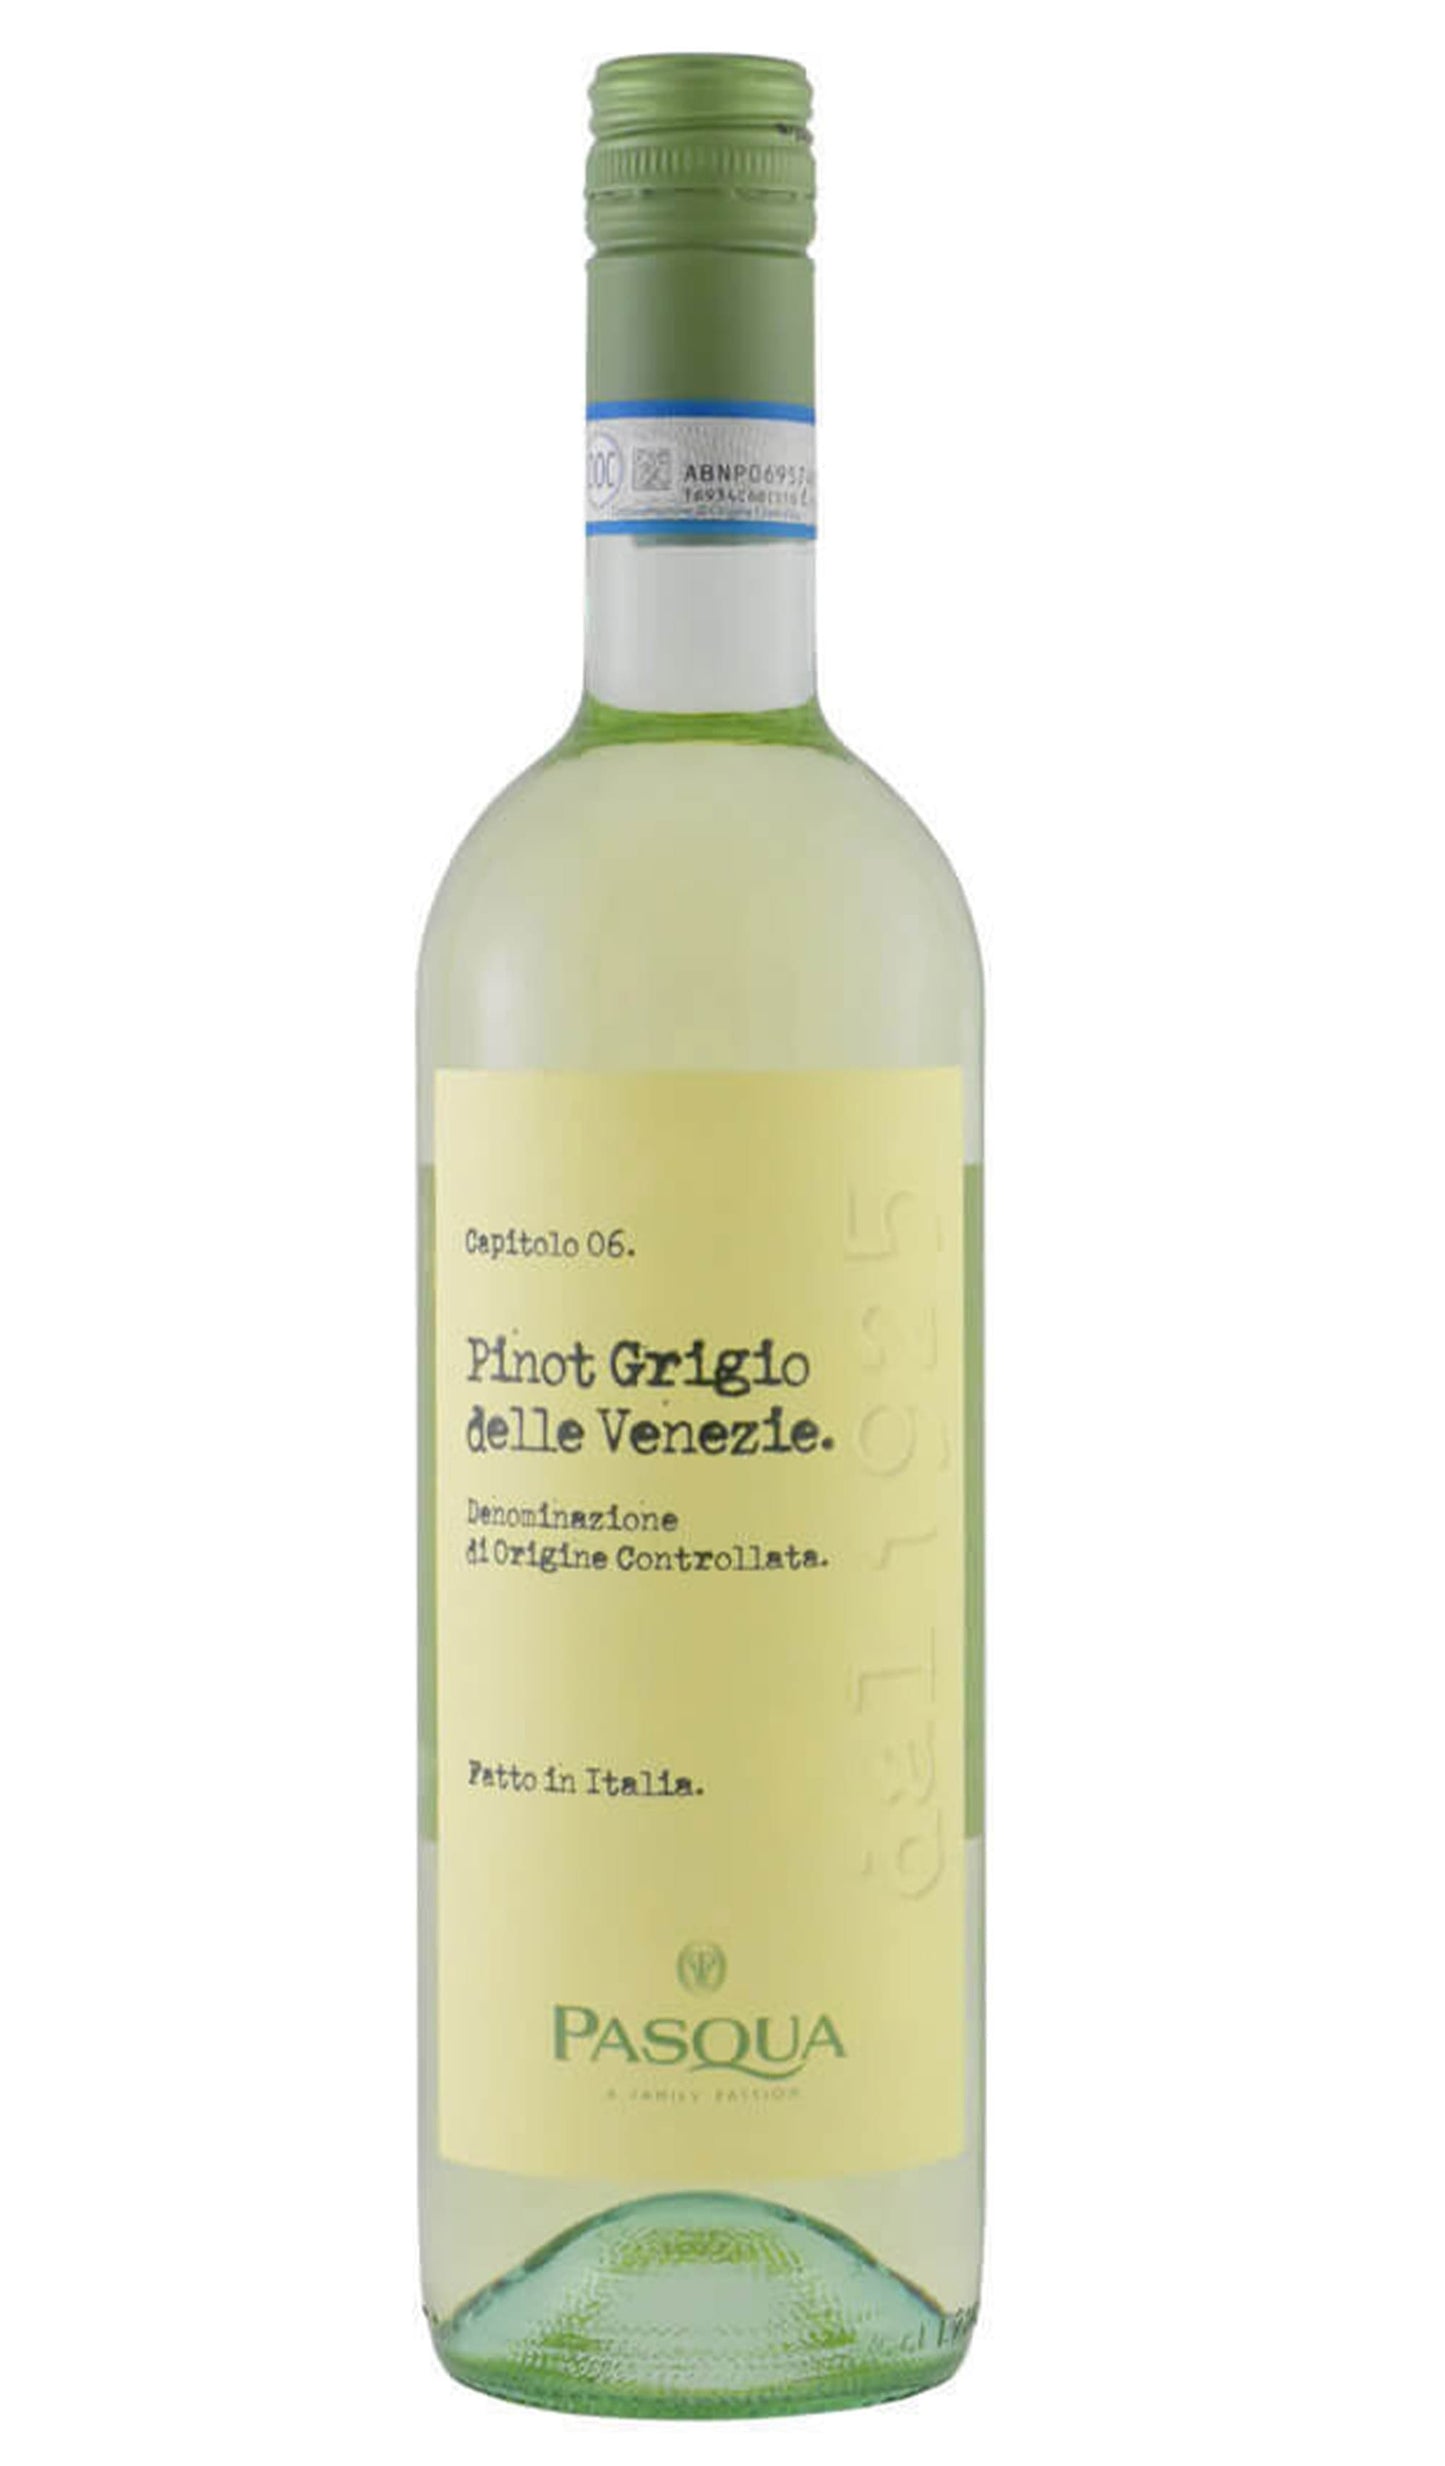 Find out more or buy Pasqua Delle Venezie Pinot Grigio 2023 (DOC, Italy) online at Wine Sellers Direct - Australia’s independent liquor specialists.